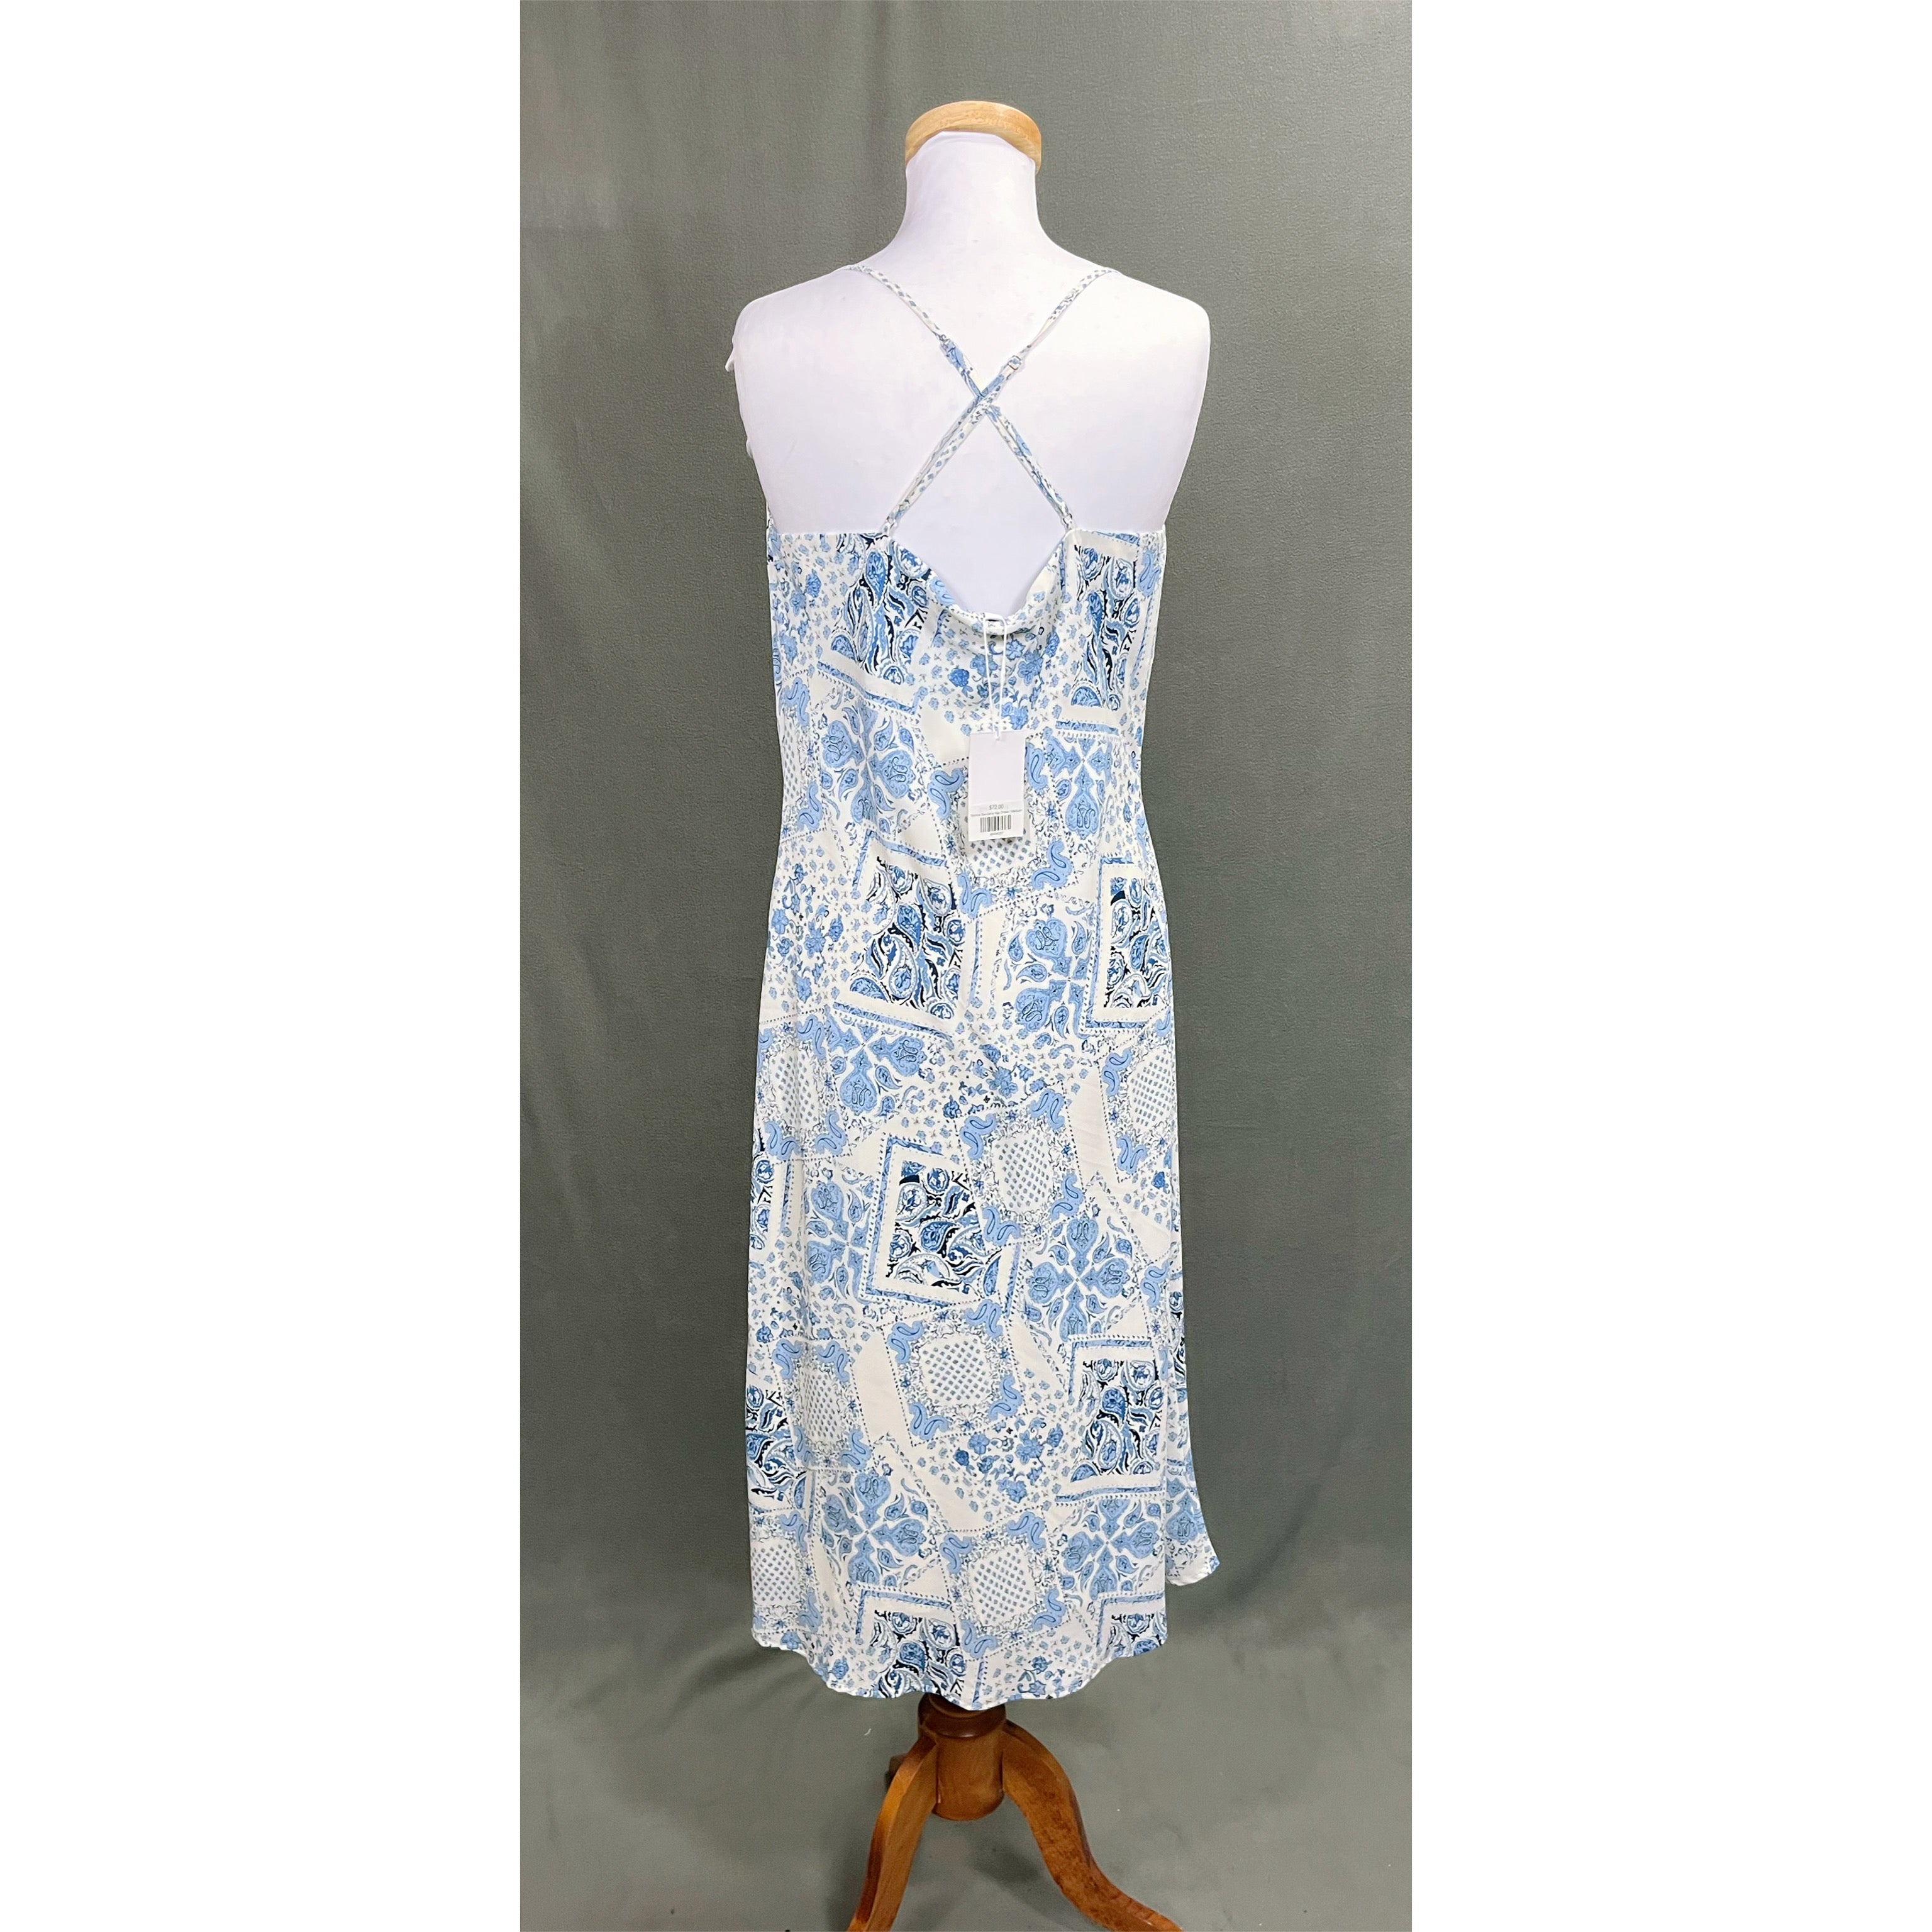 Lucy Paris white and light blue dress, size  M, NEW WITH TAGS!